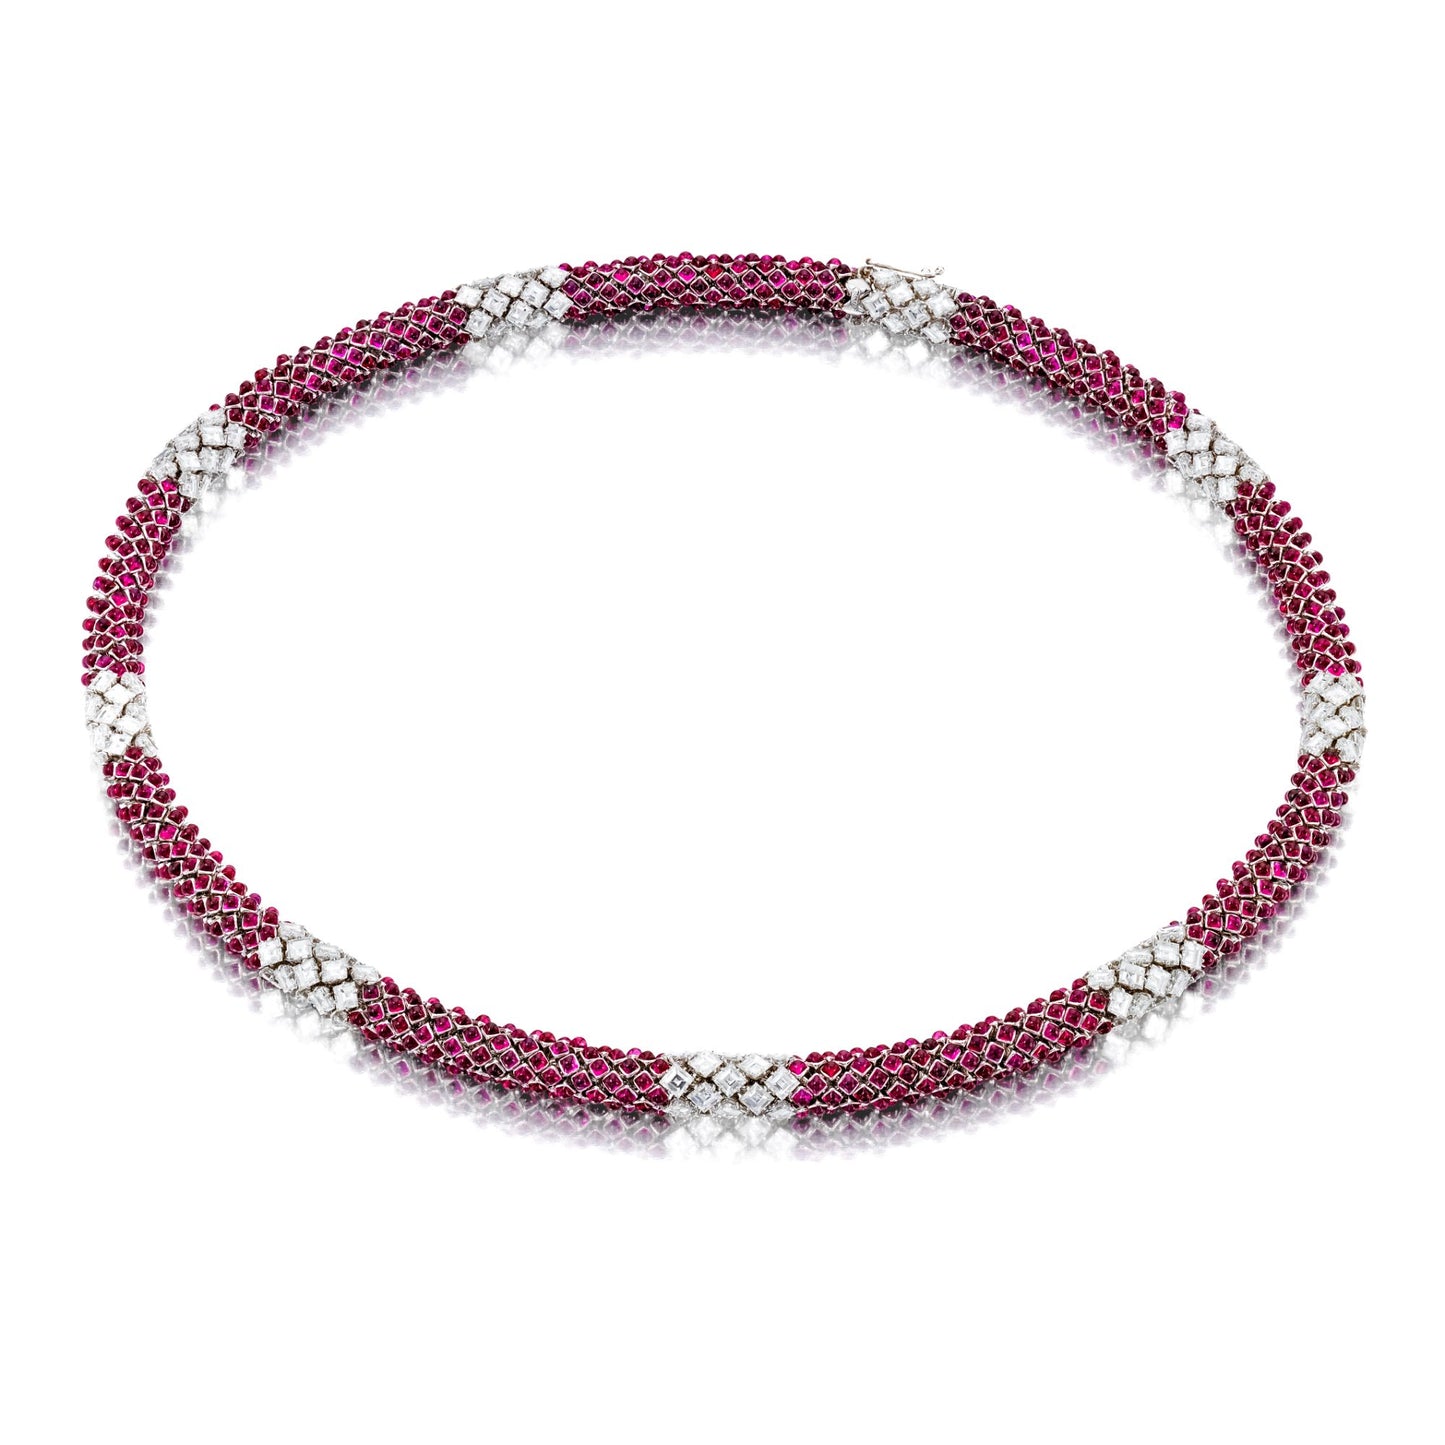 RUBY  AND  DIAMOND  NECKLACE  AND  BRACELET BY  SIEGELSON,  NEW  YORK